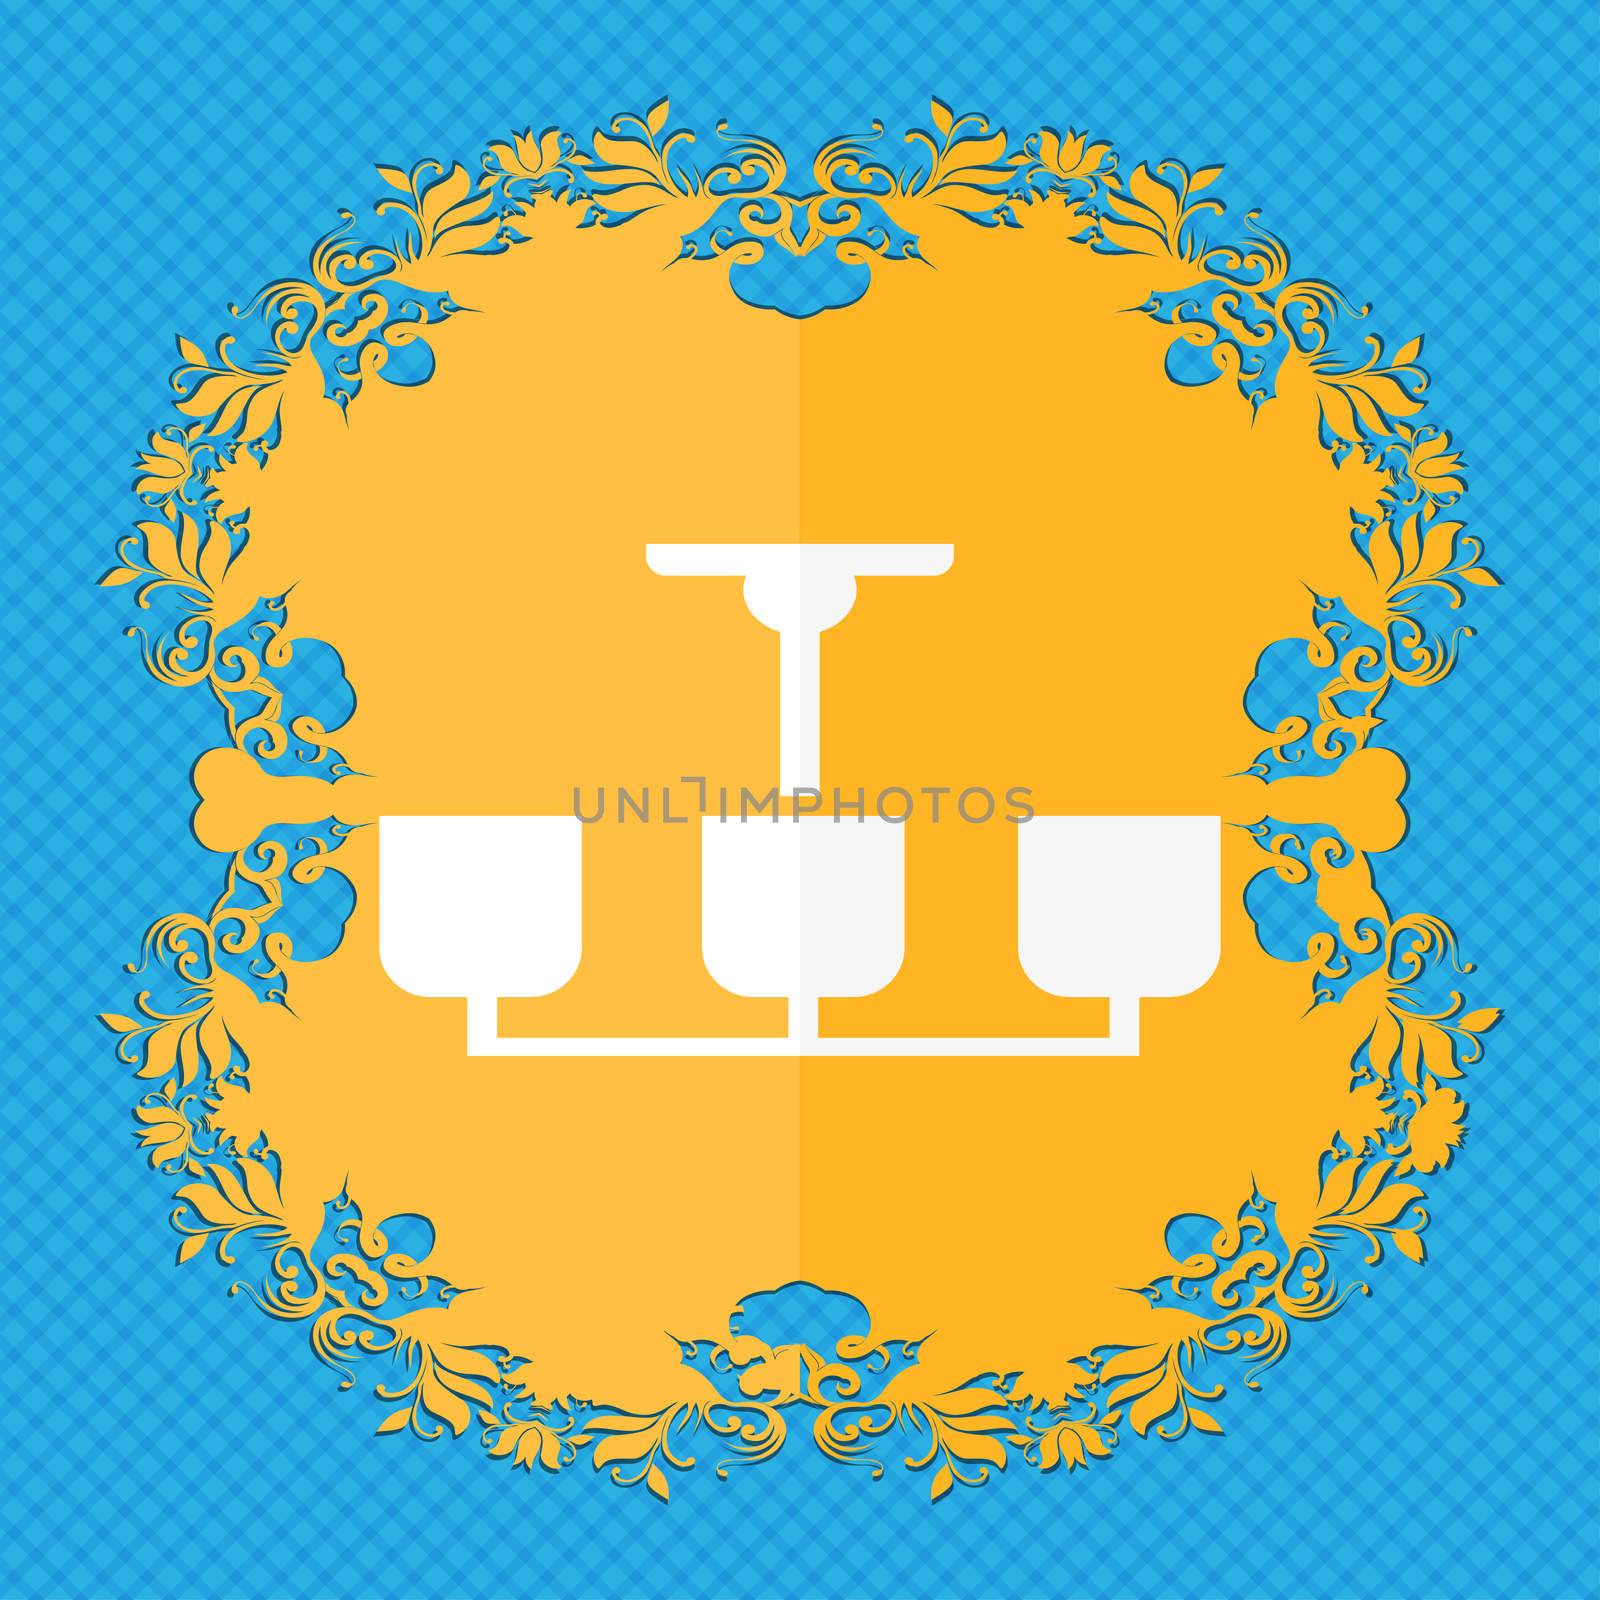 Chandelier Light Lamp icon sign. Floral flat design on a blue abstract background with place for your text. illustration